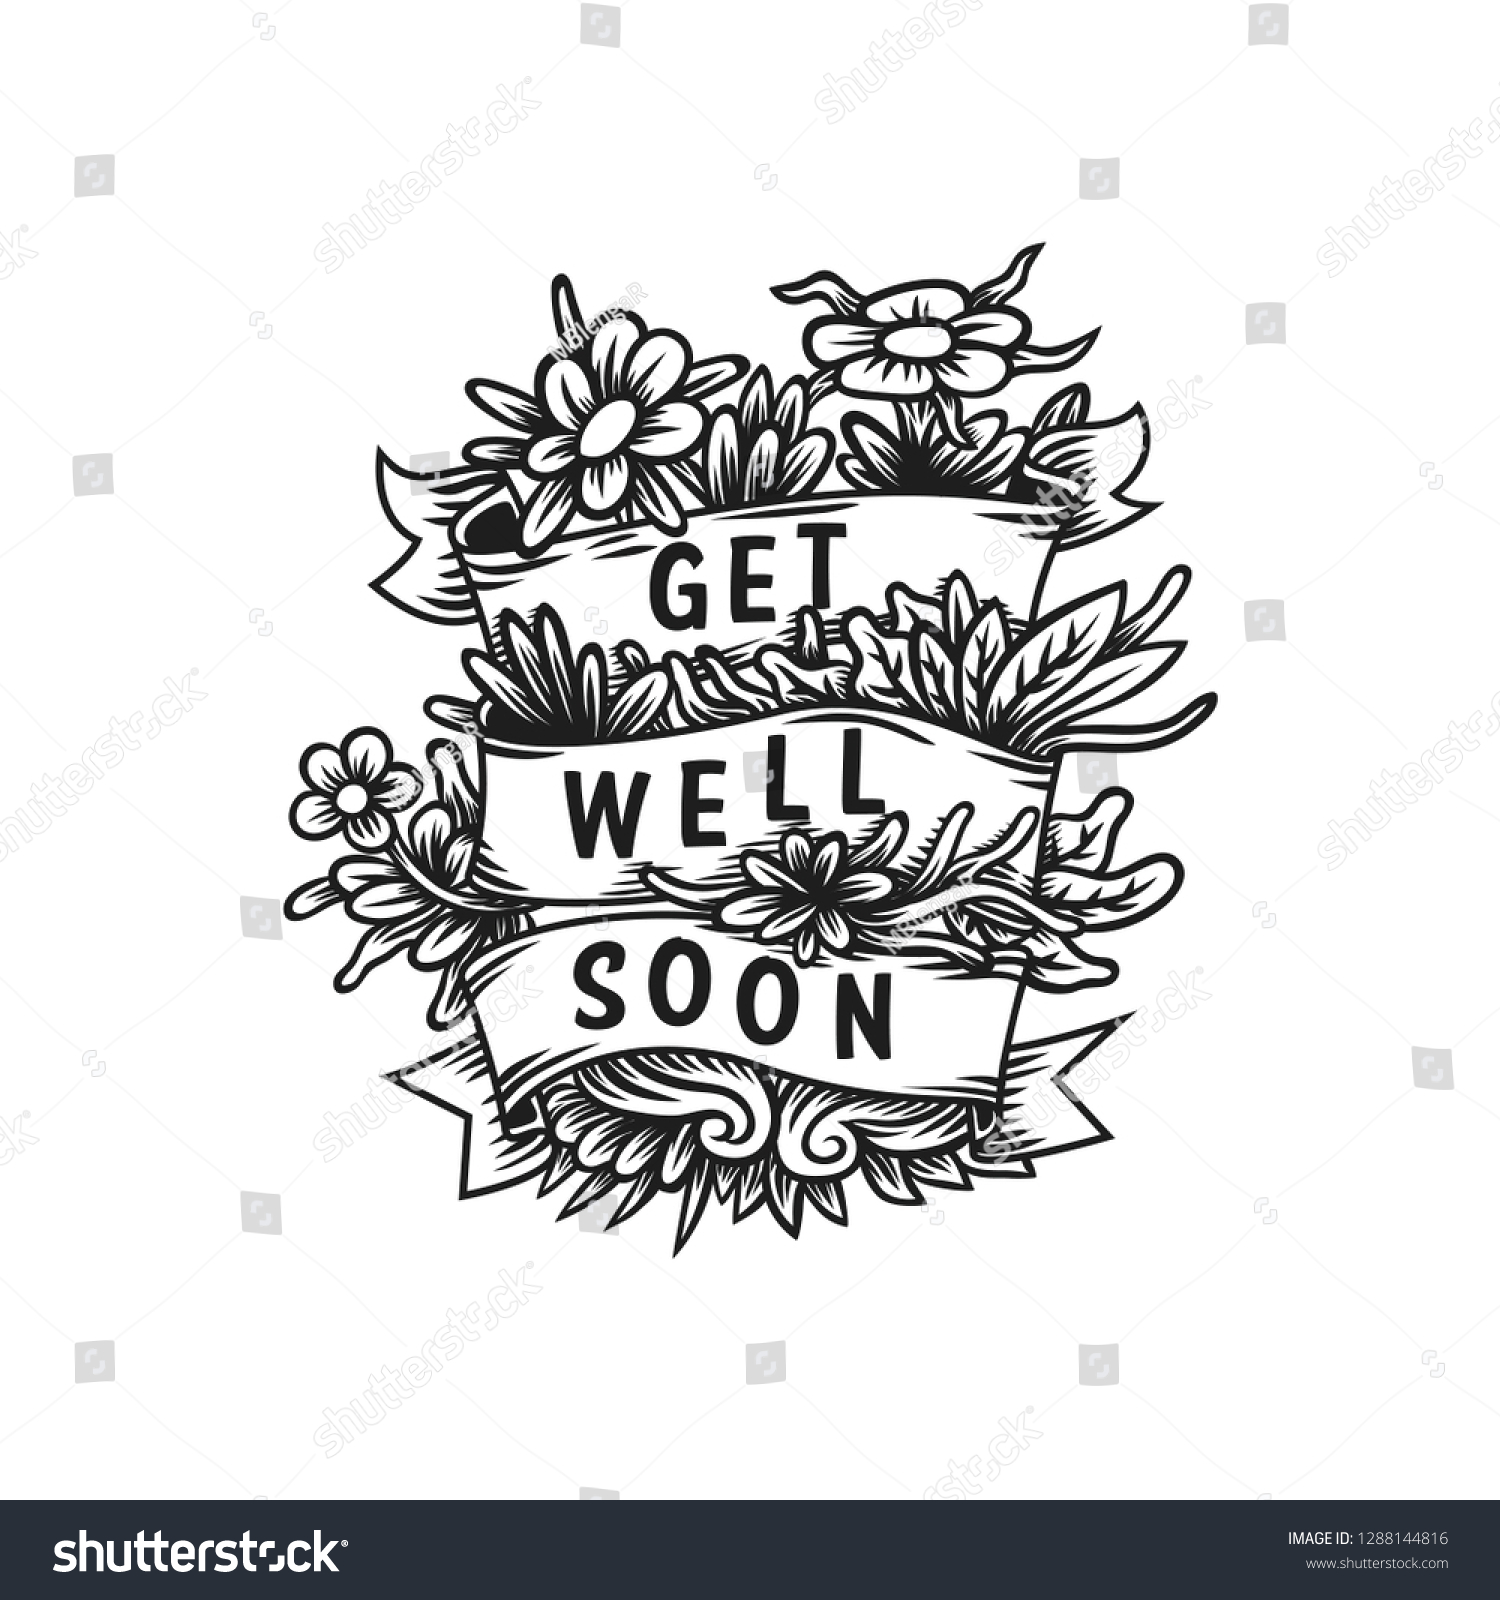 Get Well Soon Card Drawing Stock Vector (Royalty Free) 1288144816